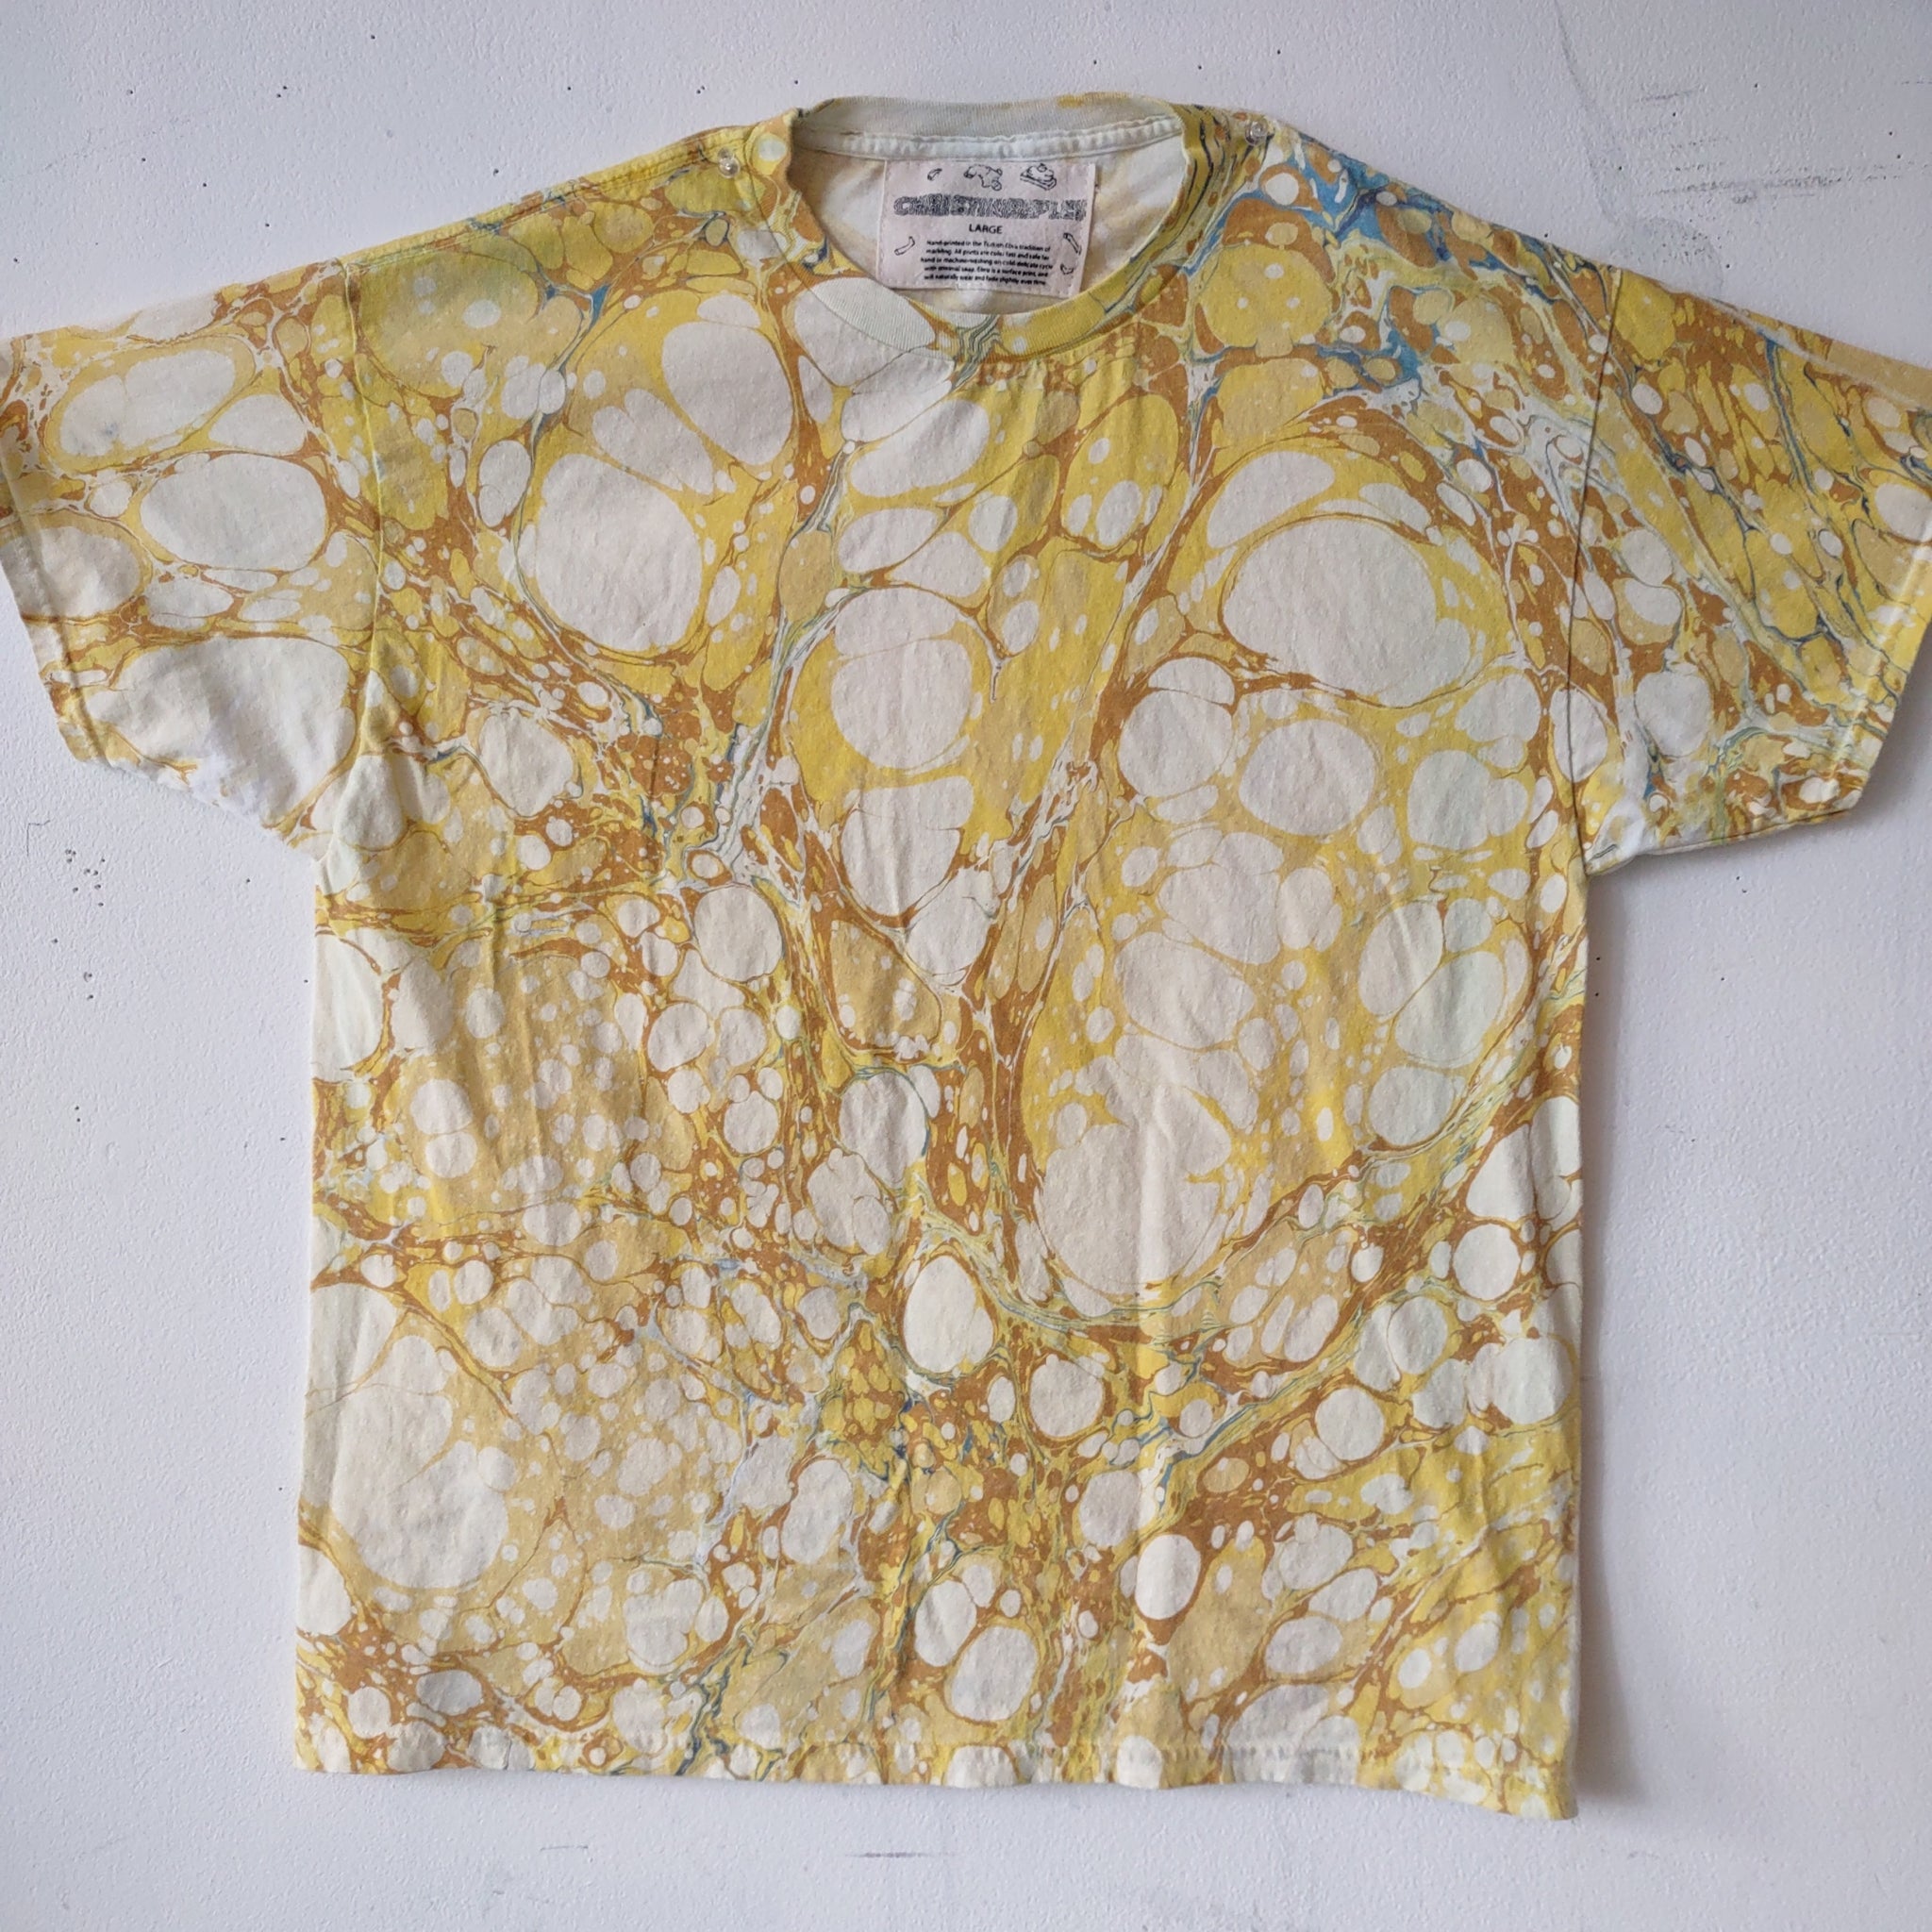 MARBLED T-SHIRT - Adult Large